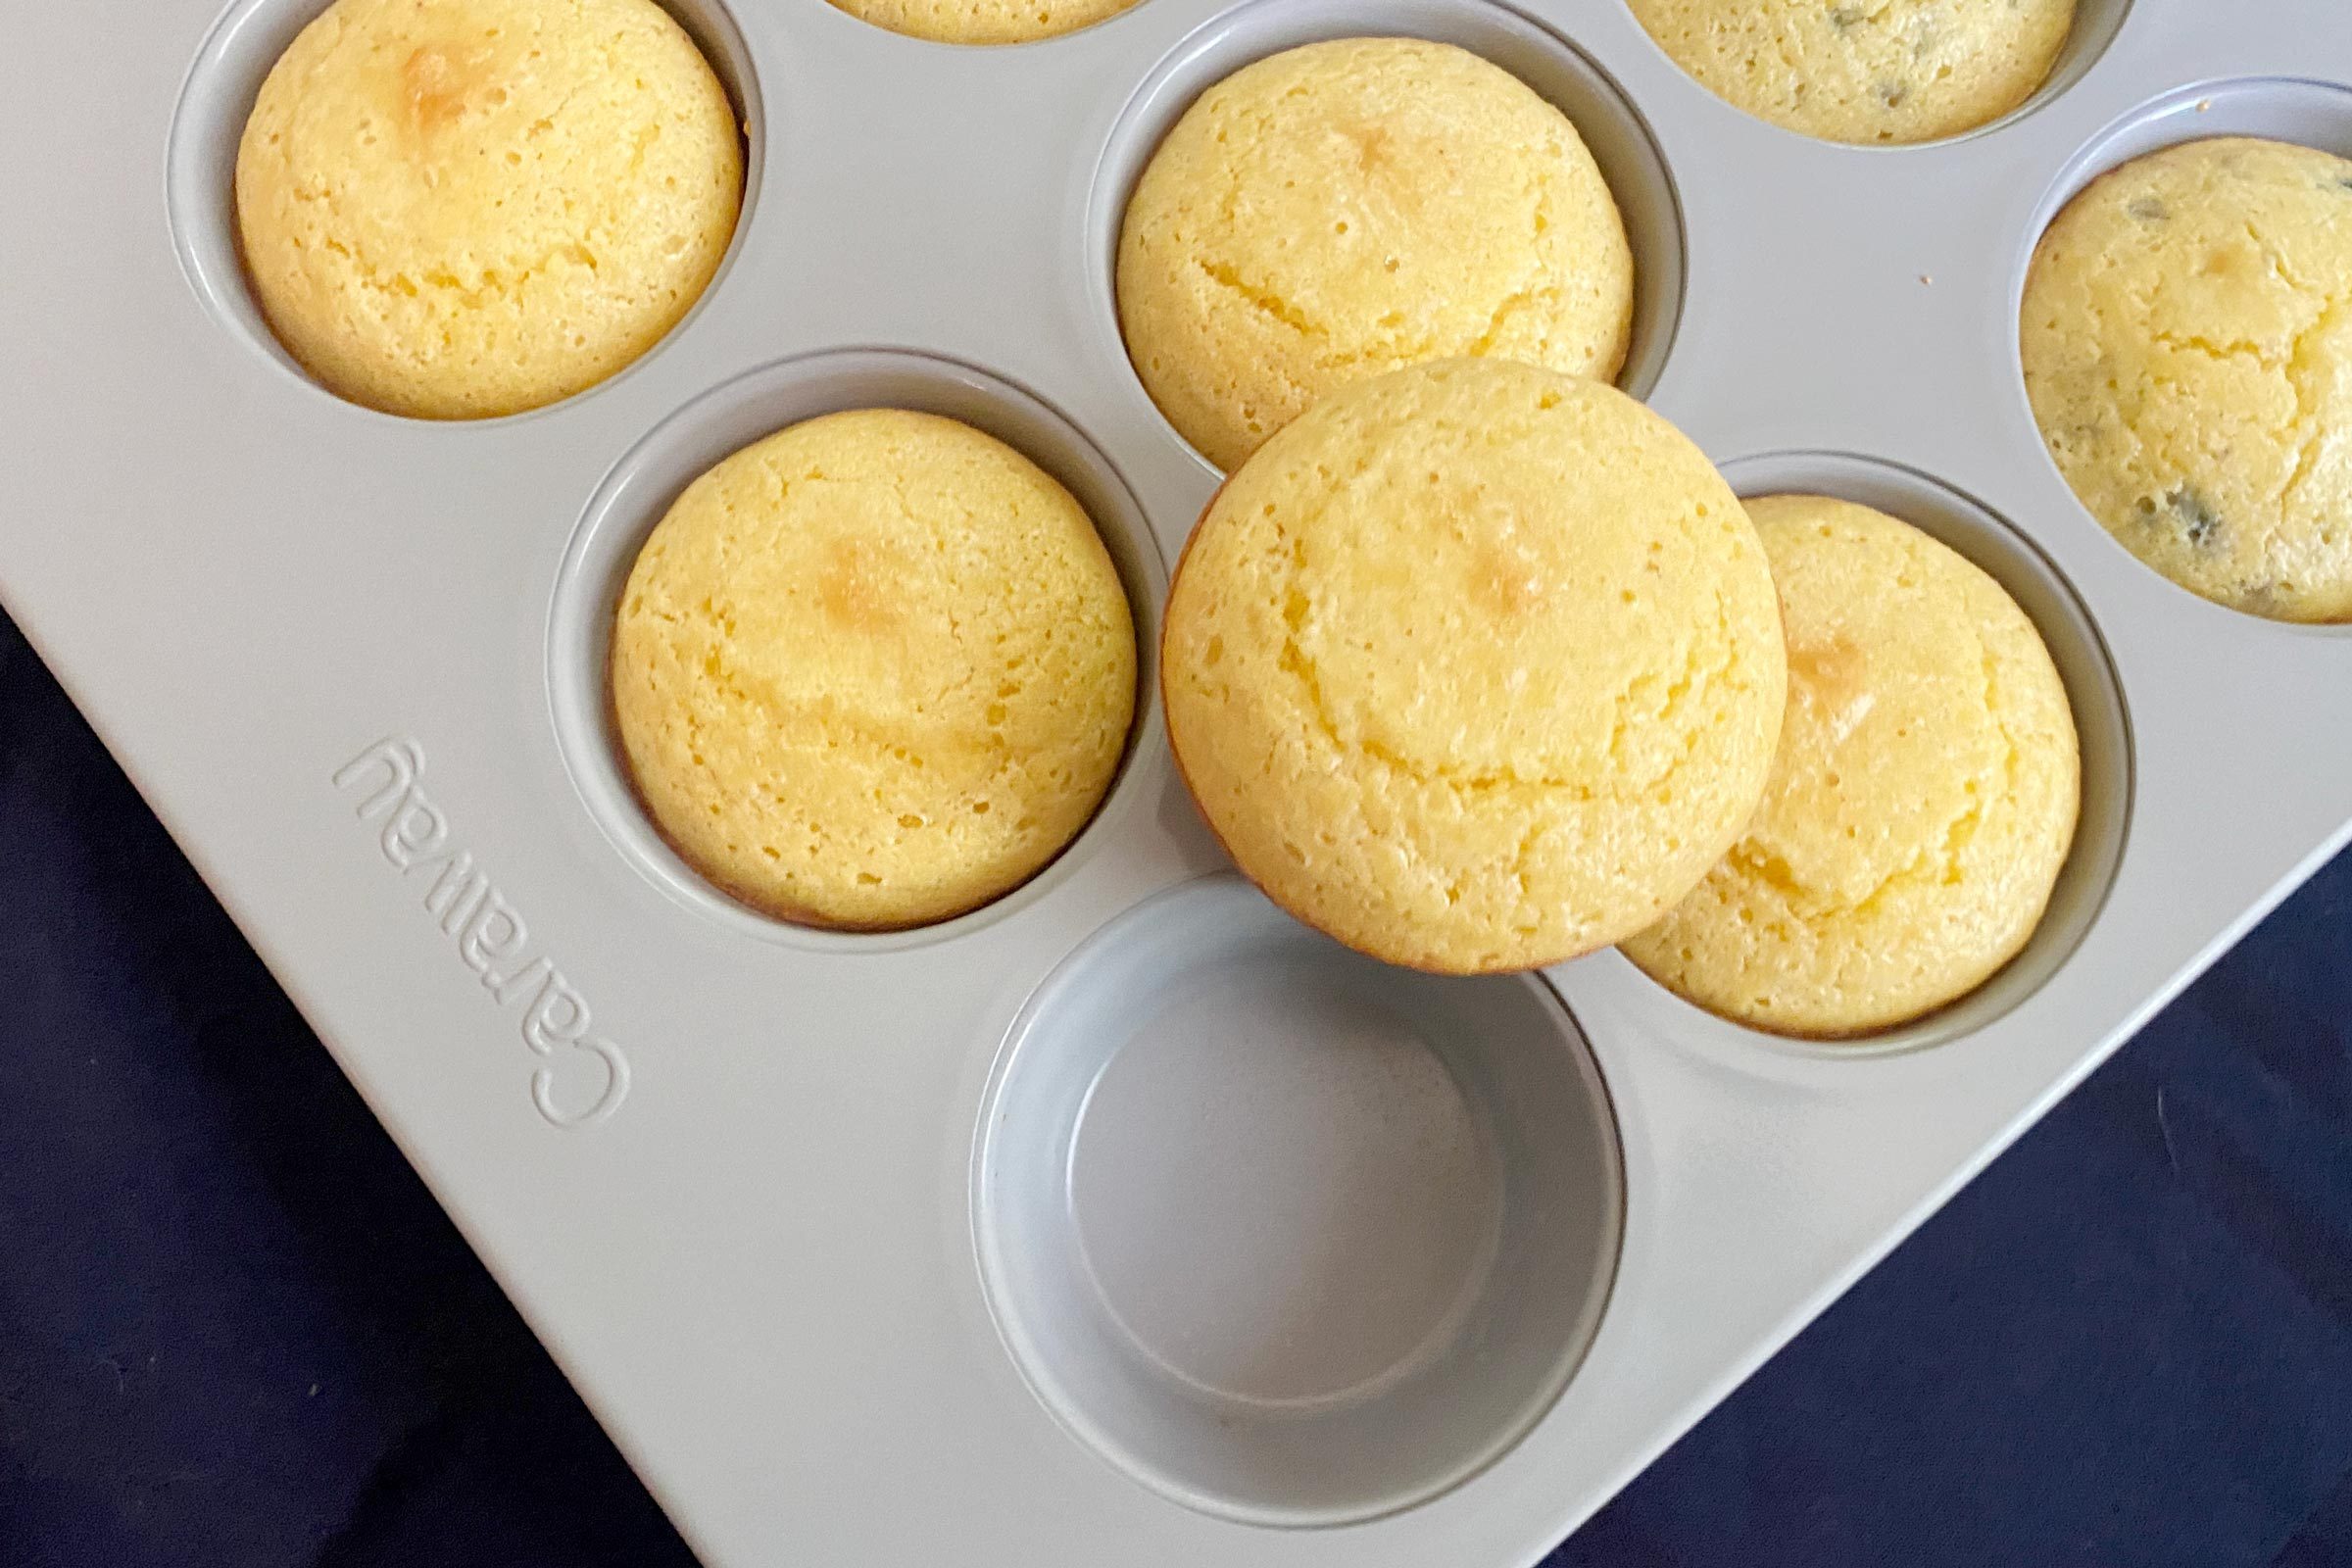 We Tried Caraway Bakeware—Here's Why It's Worth the Hype